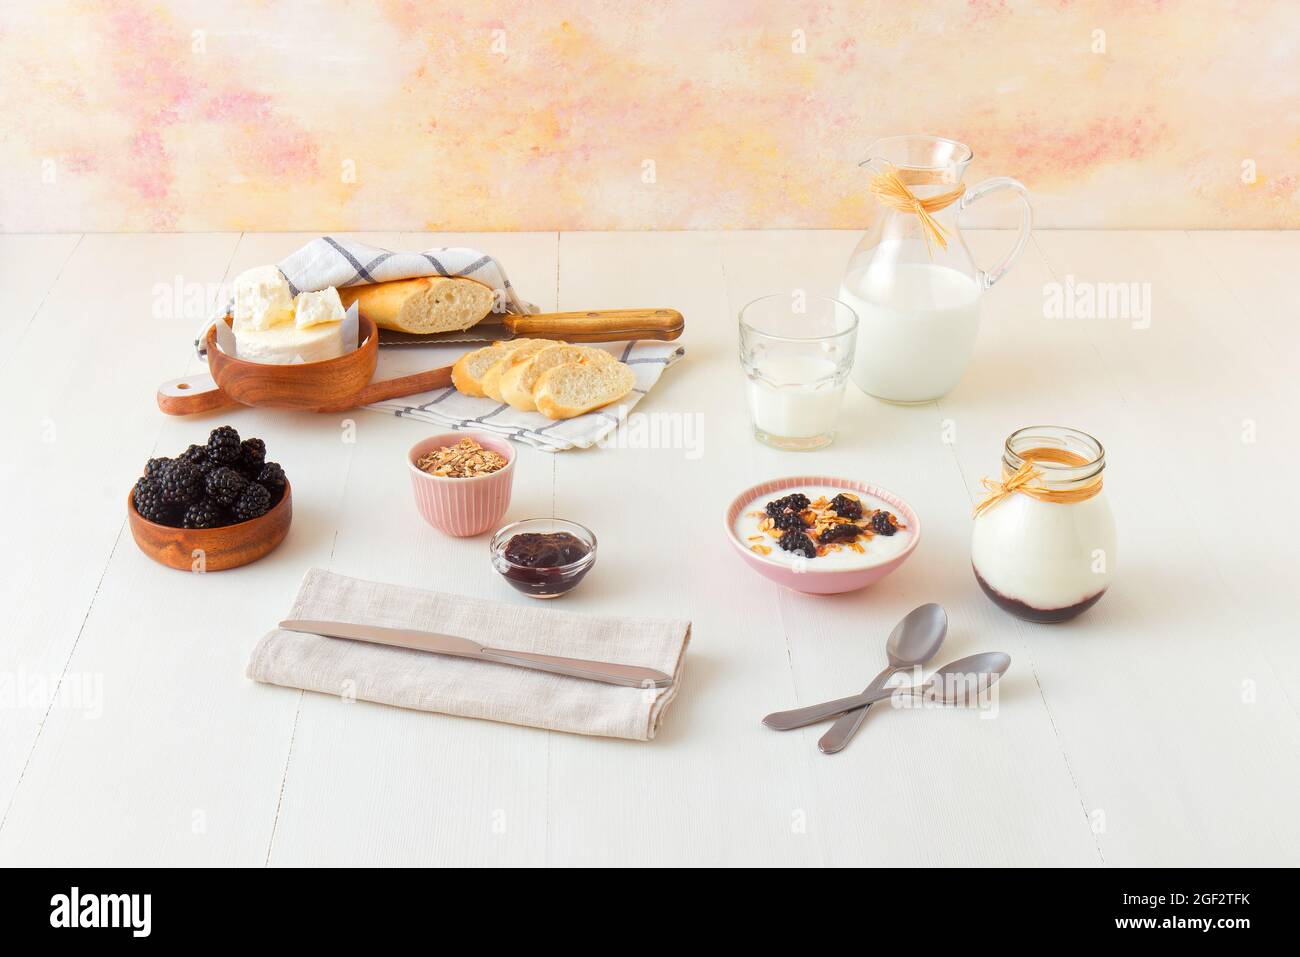 Bowl of blackberries, milk, yoghurt with oatmeals, fresh cheese and bread, a table set for breakfast, ingredients from the local farmers market. High Stock Photo